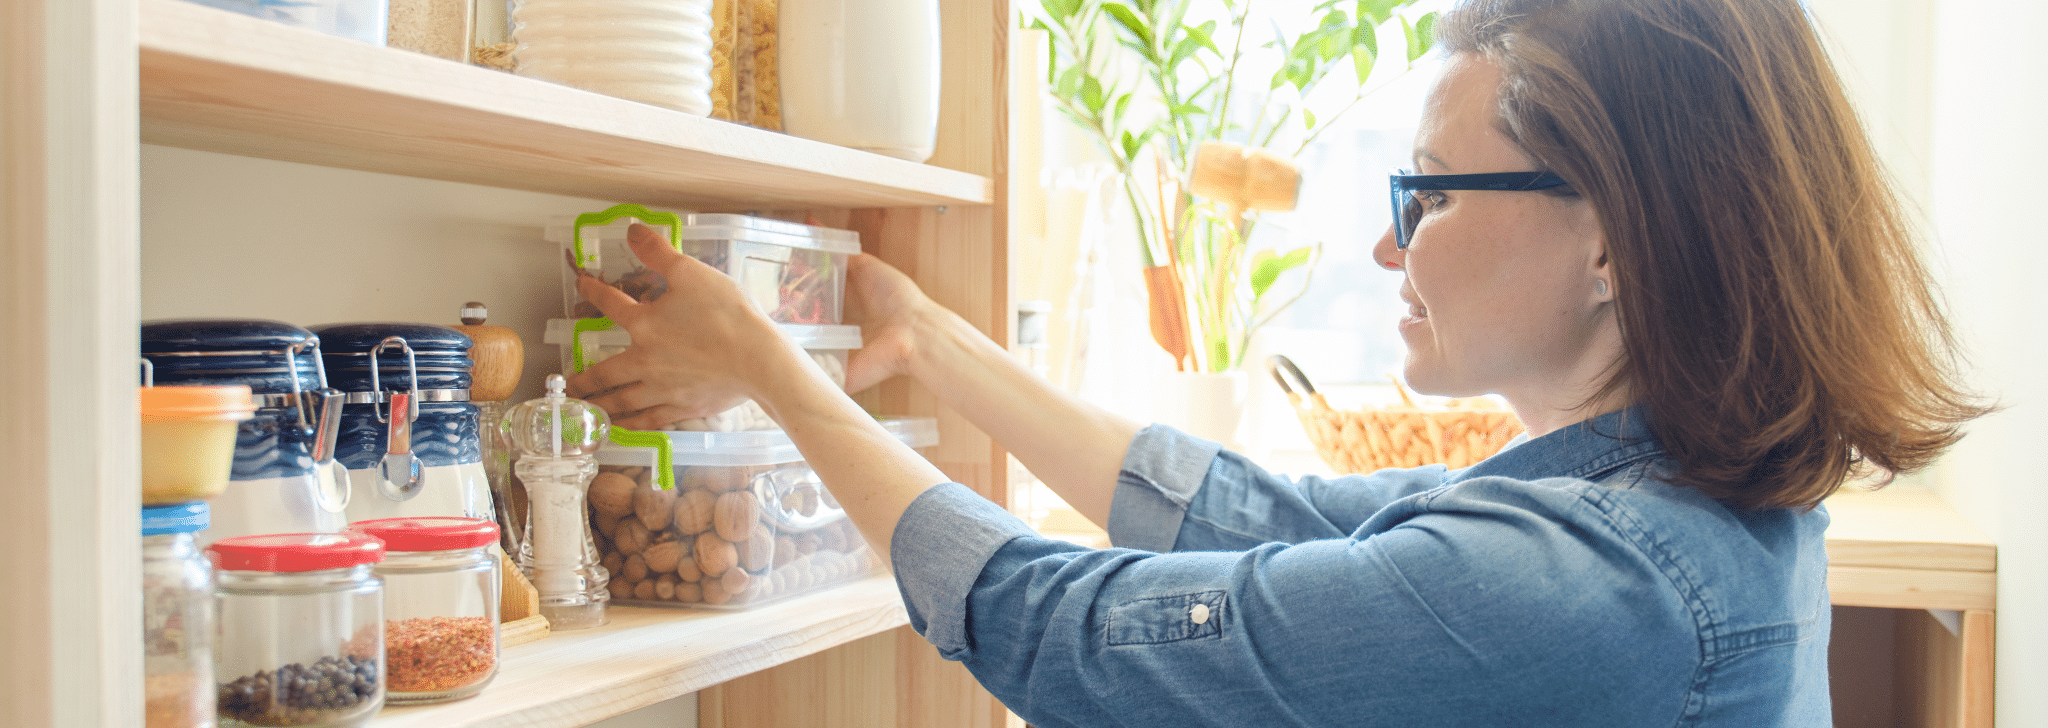 Best Plant-Based Staples to Have in Your Pantry While Social Distancing